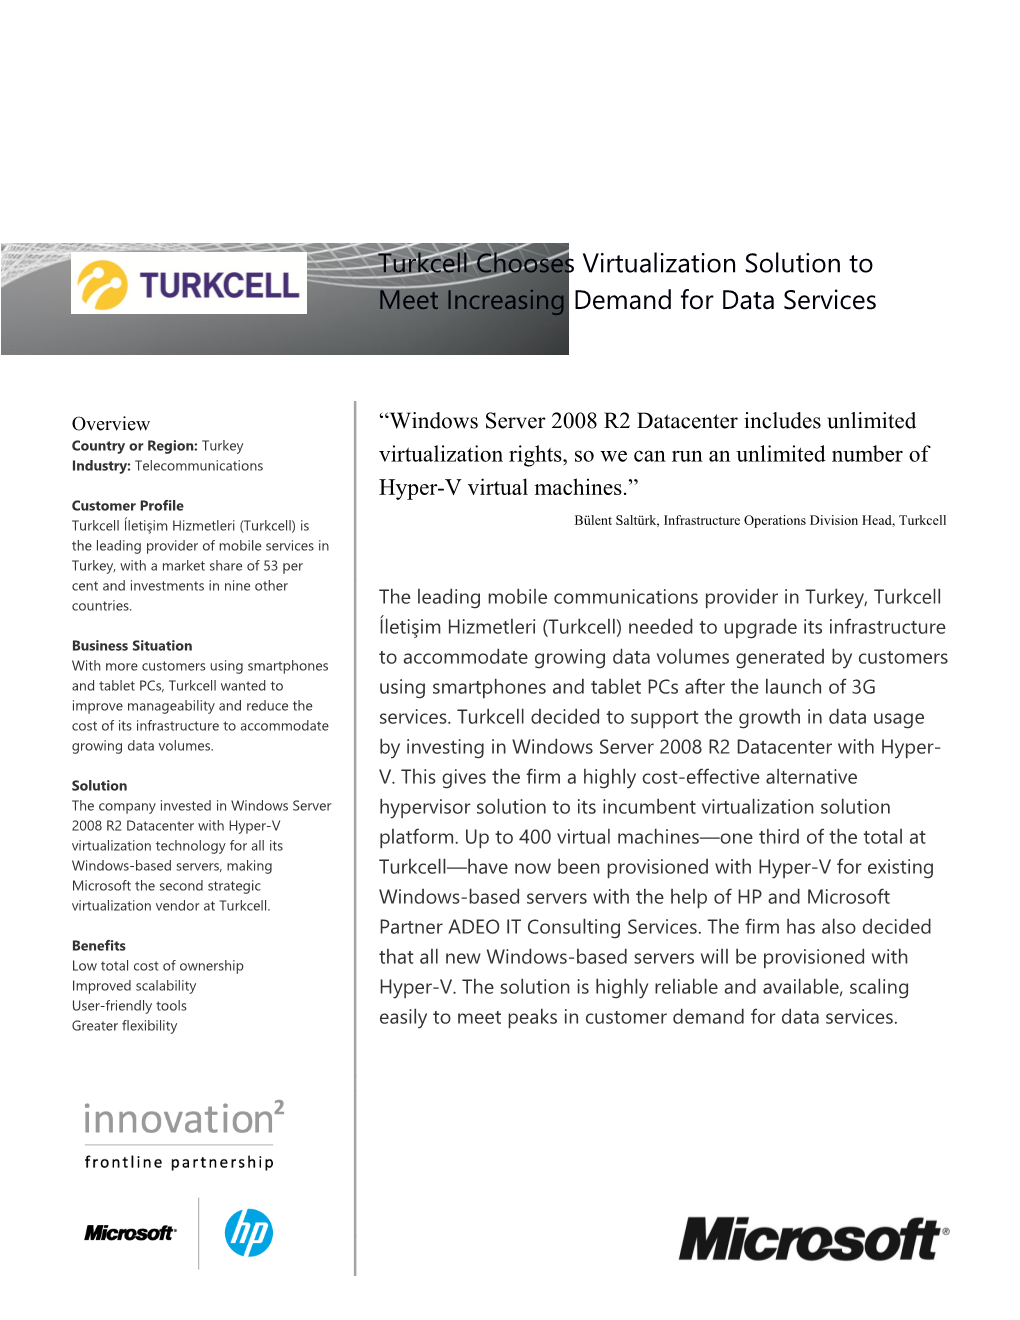 Metia CEP Turkcell Chooses Microsoft Virtualisation Solution to Meet Increasing Demand for Data